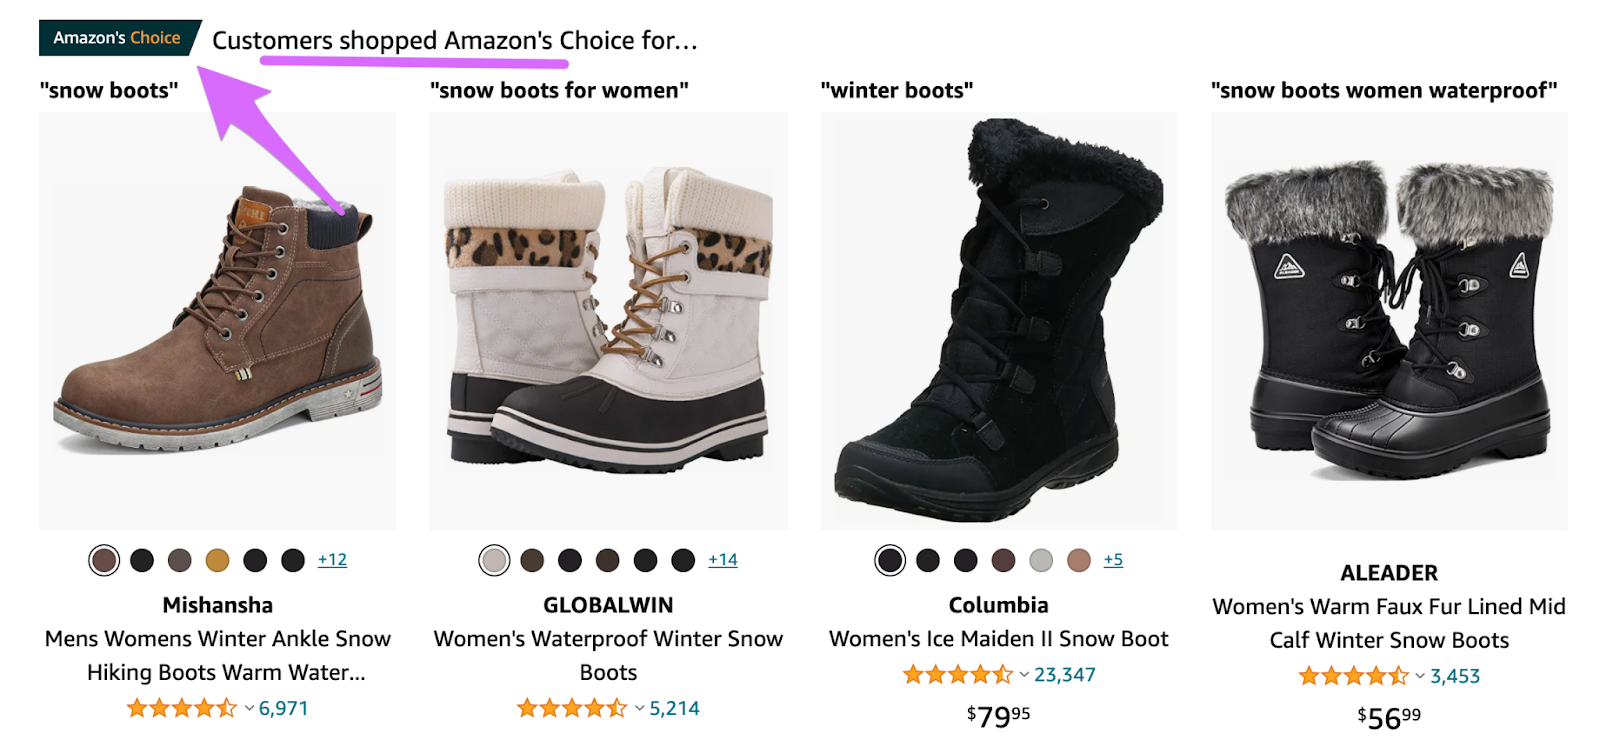 the amazon's choice badge advertising products helps for making passive income on amazon